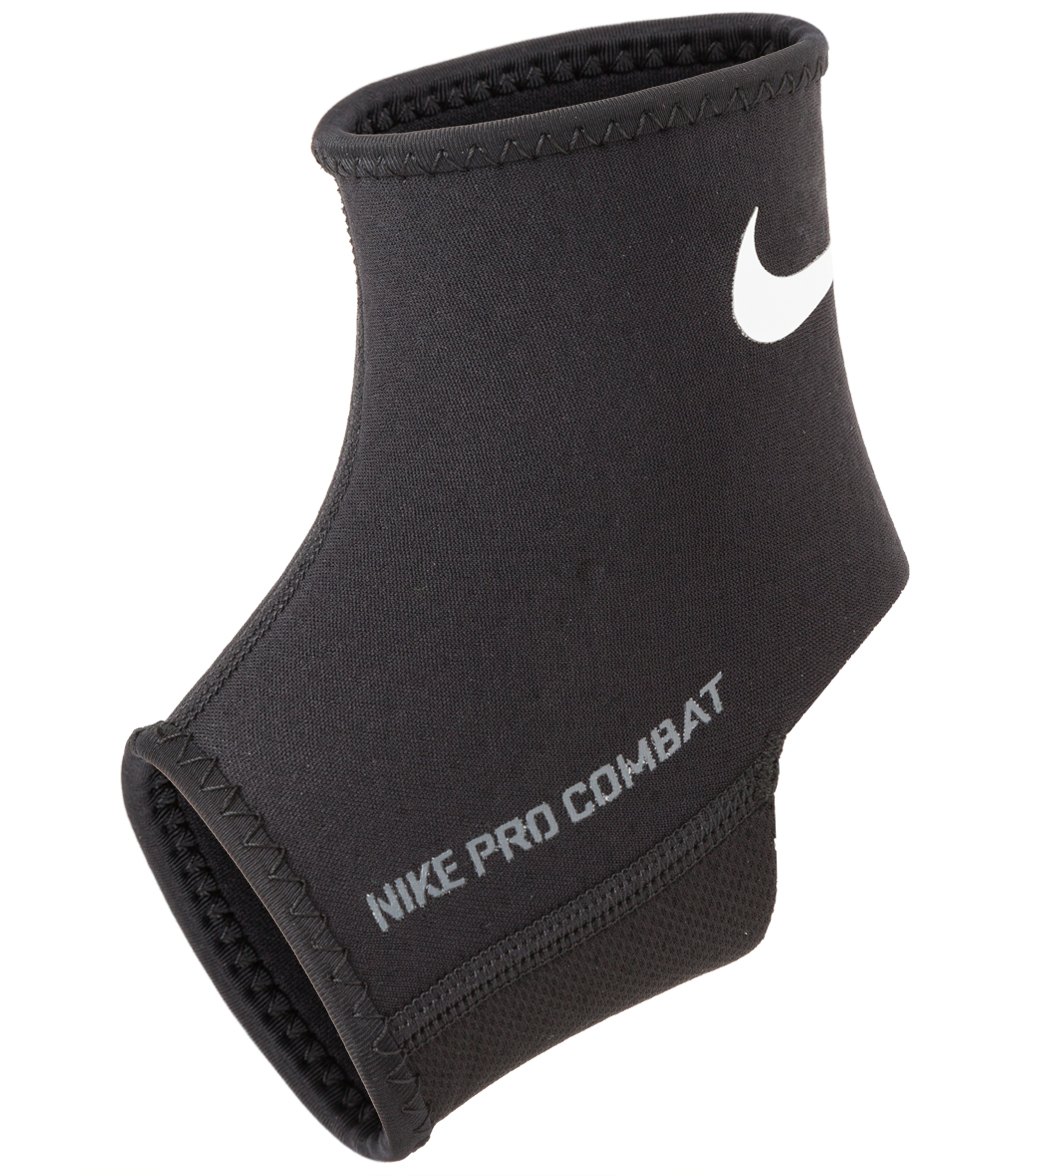 Nike Pro Ankle Sleeve 2.0 at SwimOutlet.com